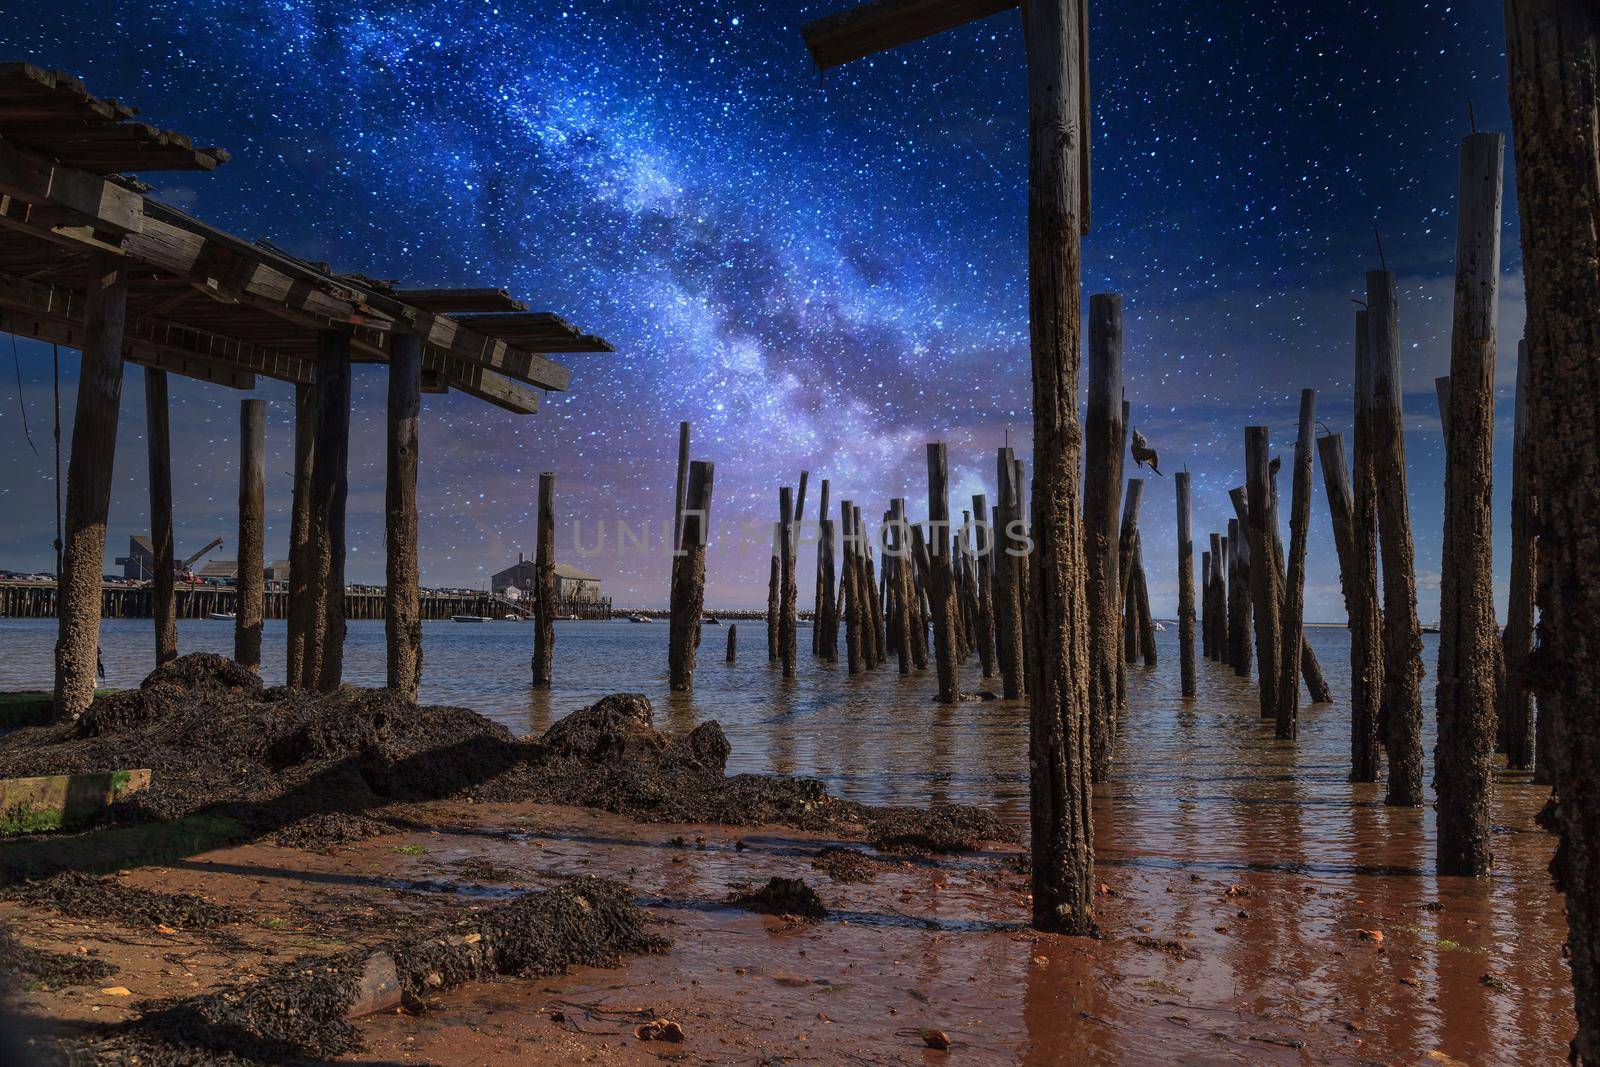 Stary sky milky way over a dilapidated old pier in Provincetown by steffstarr